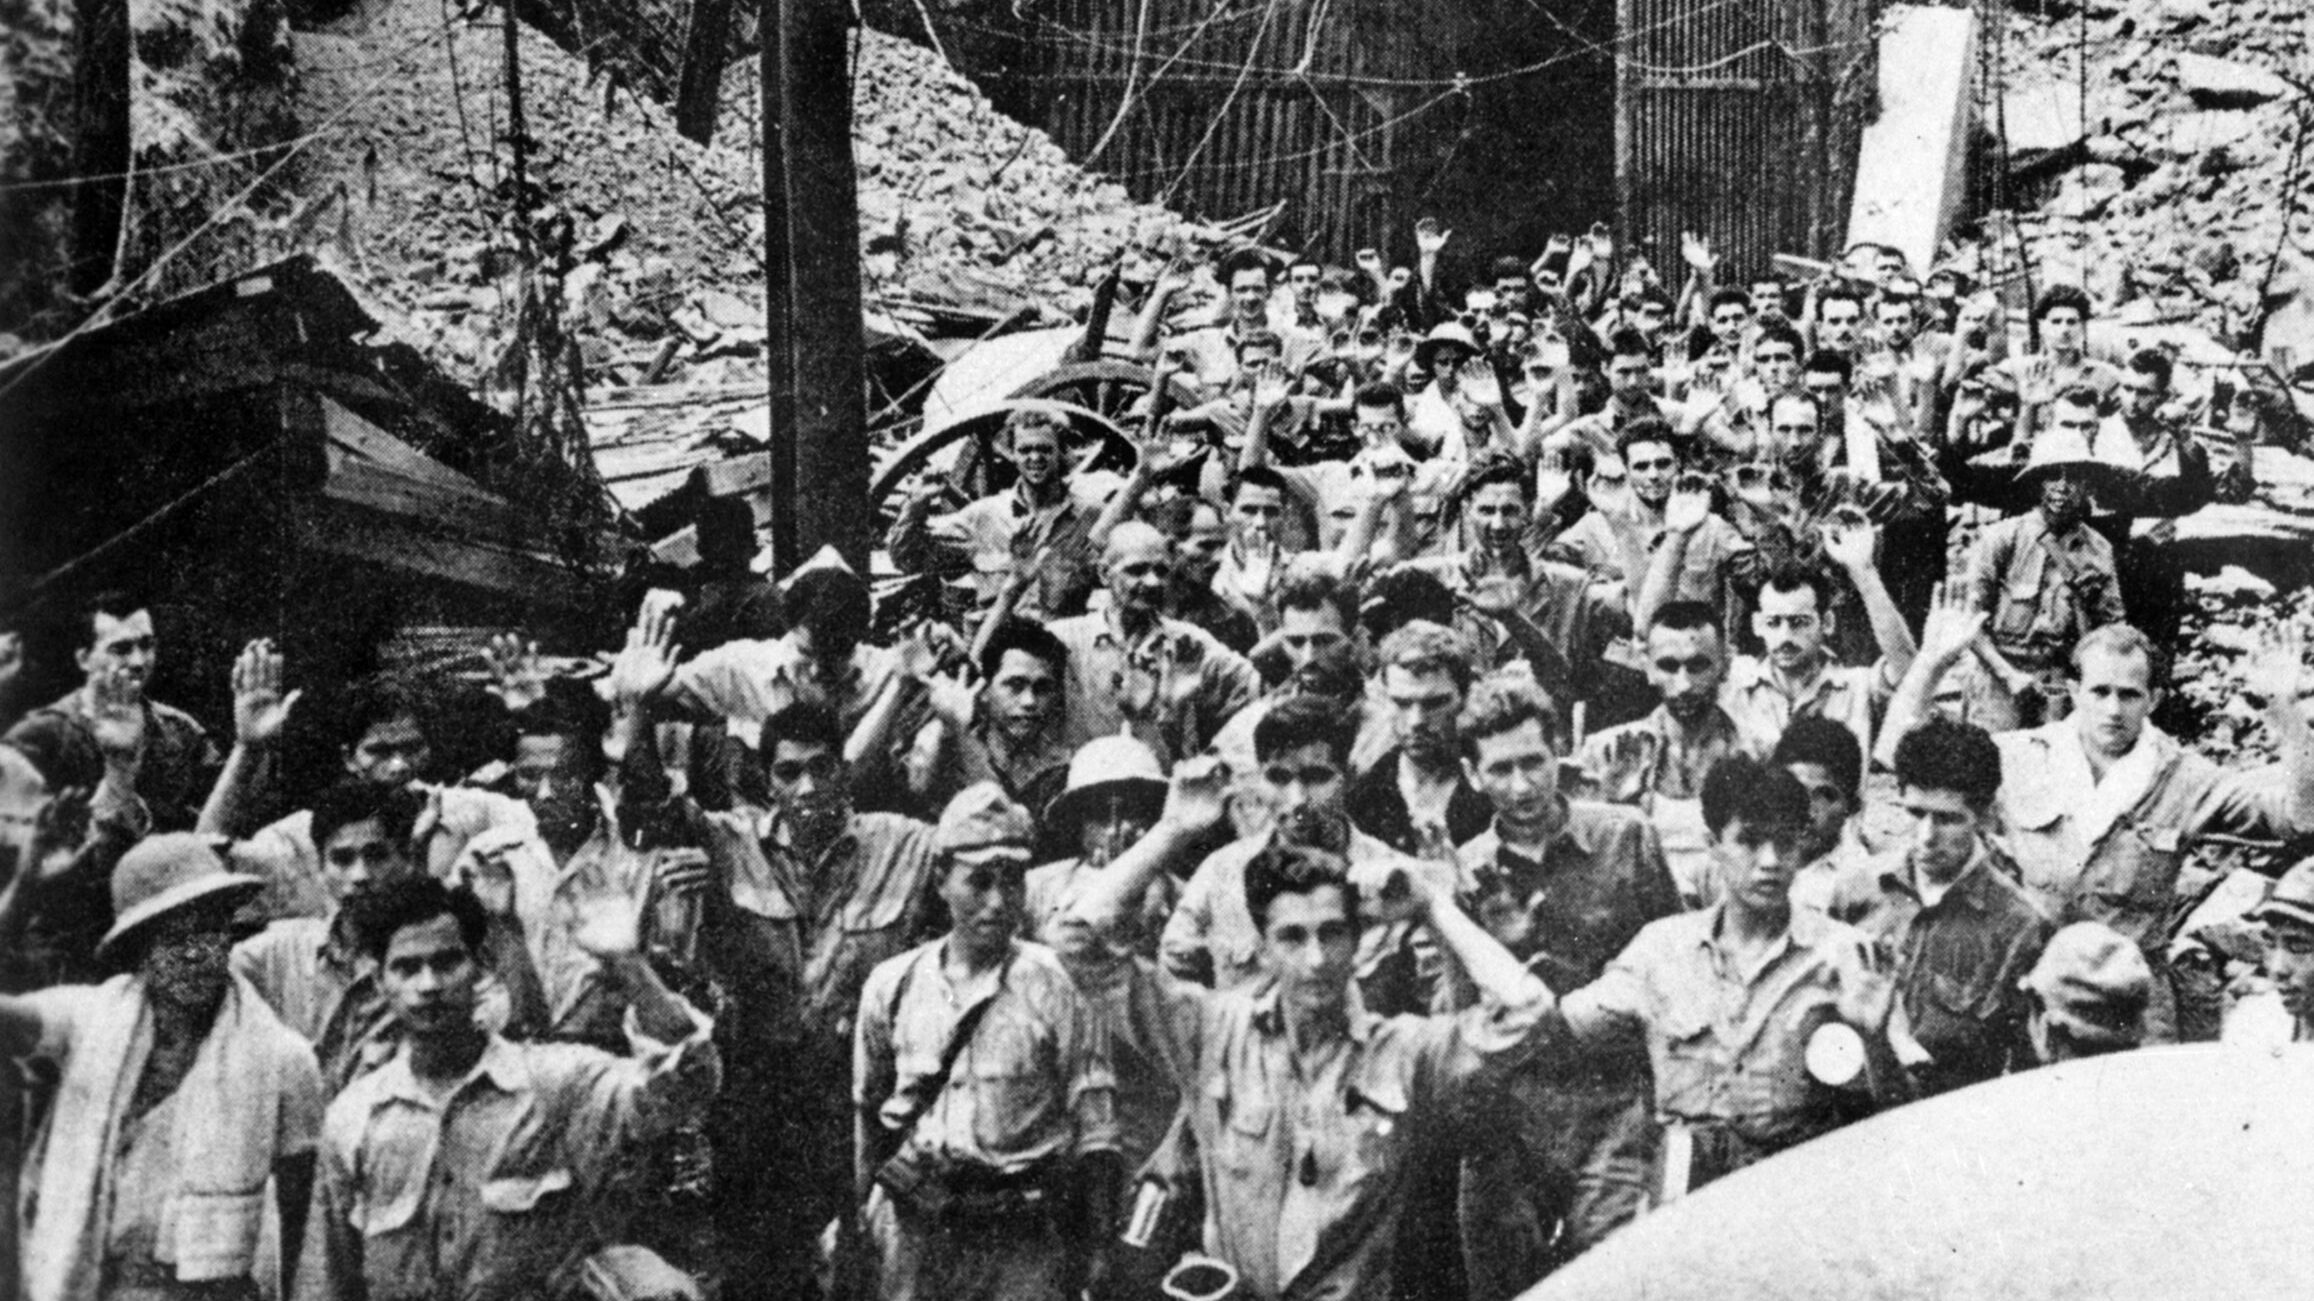 Captured Japanese photo of American and Filipino soldiers and sailors taken prisoner after the fall of Corregidor, May 6, 1942.